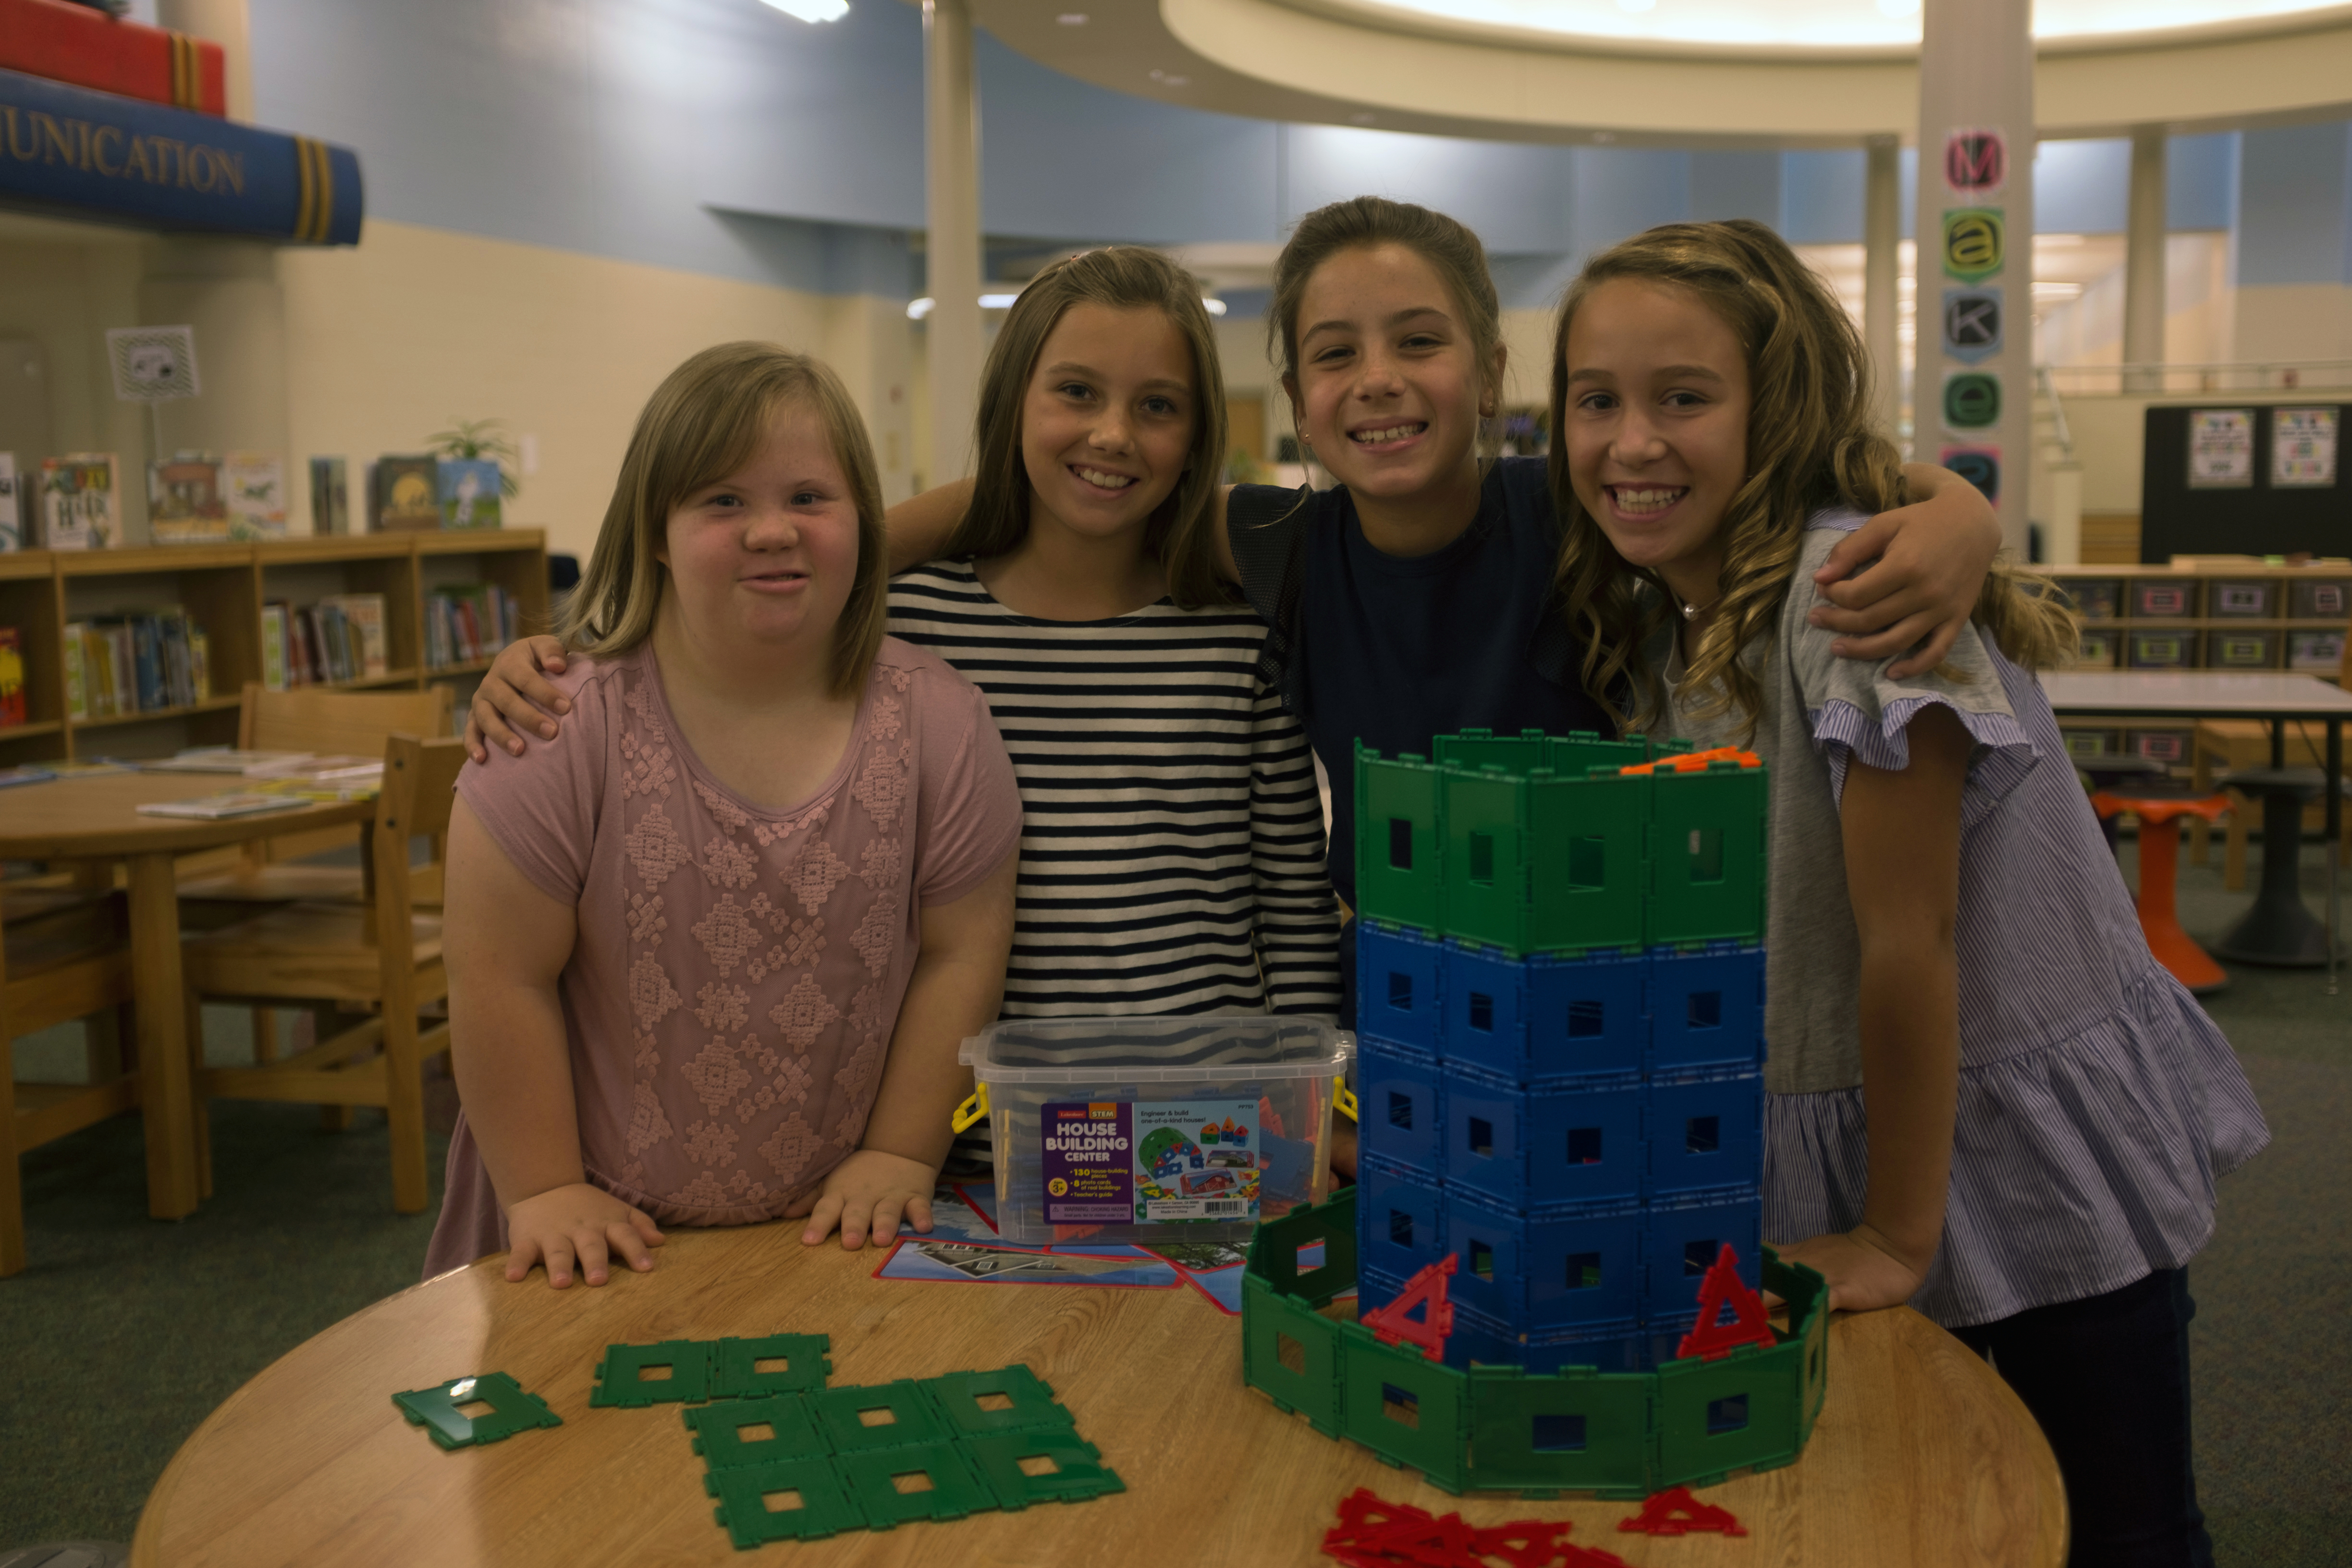 Girls at elementary school, including student with Down syndrome